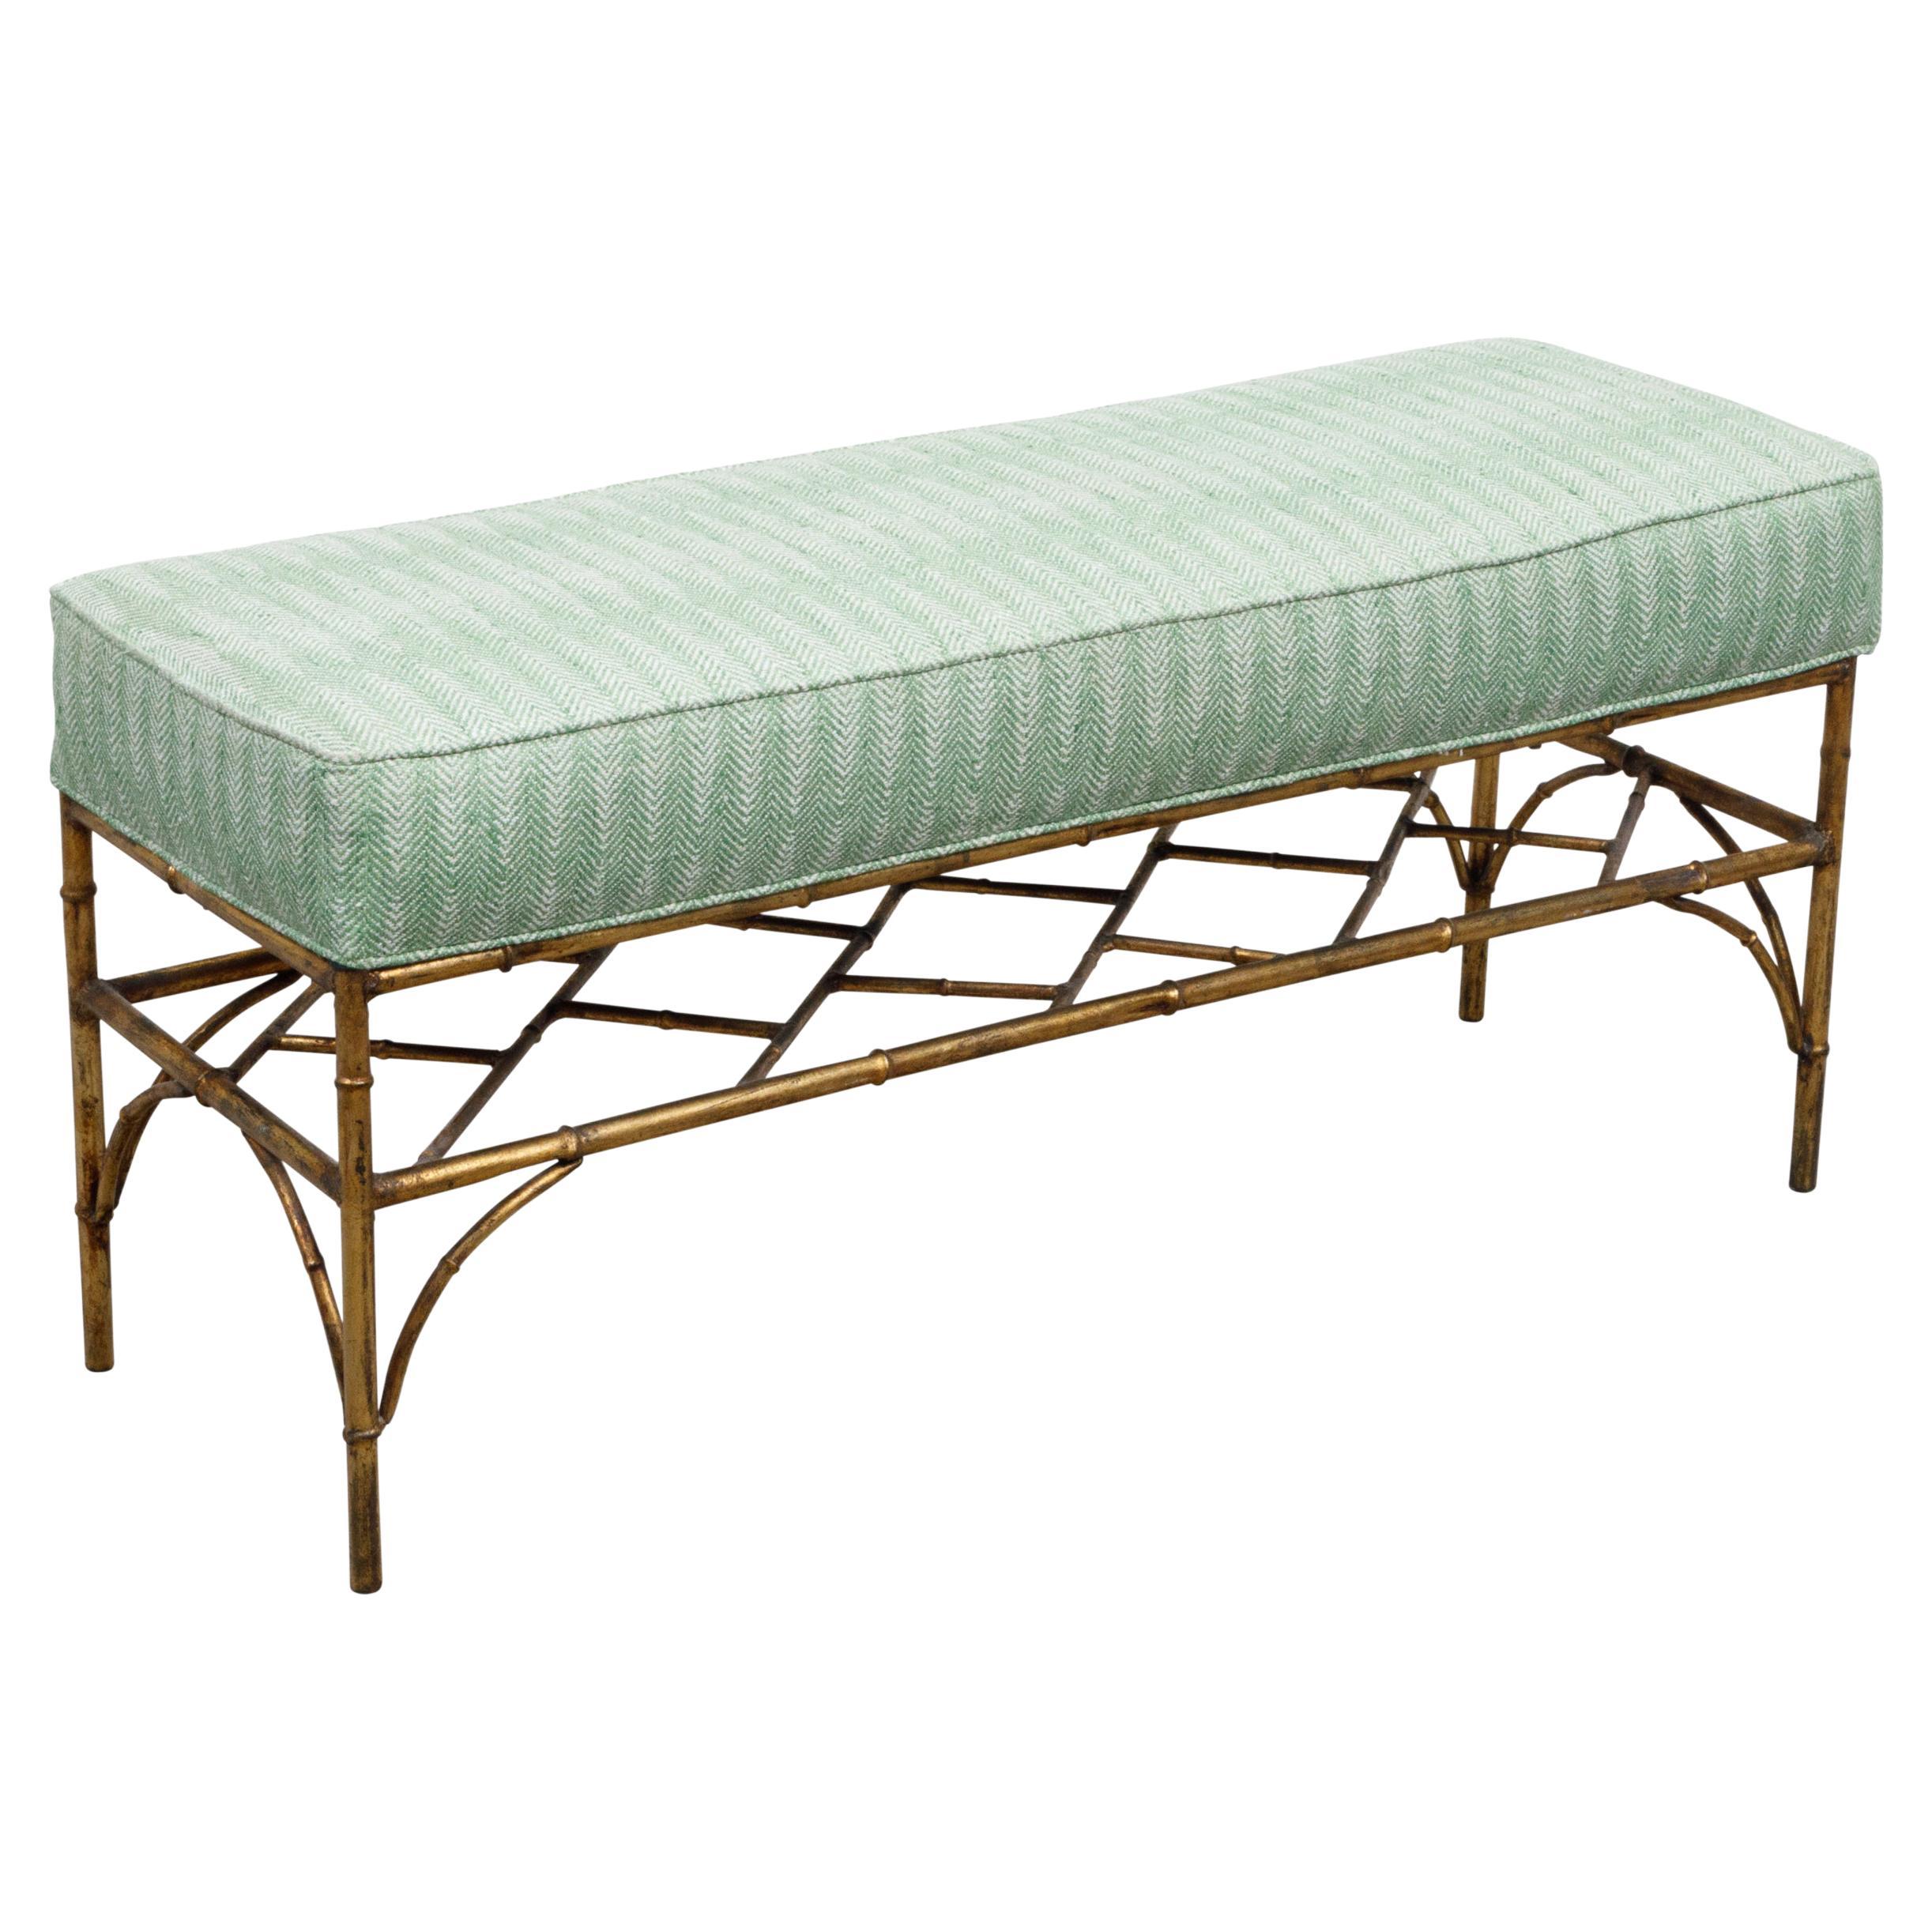 Italian Midcentury Gilt Metal Faux Bamboo Bench with Green Upholstered Seat For Sale